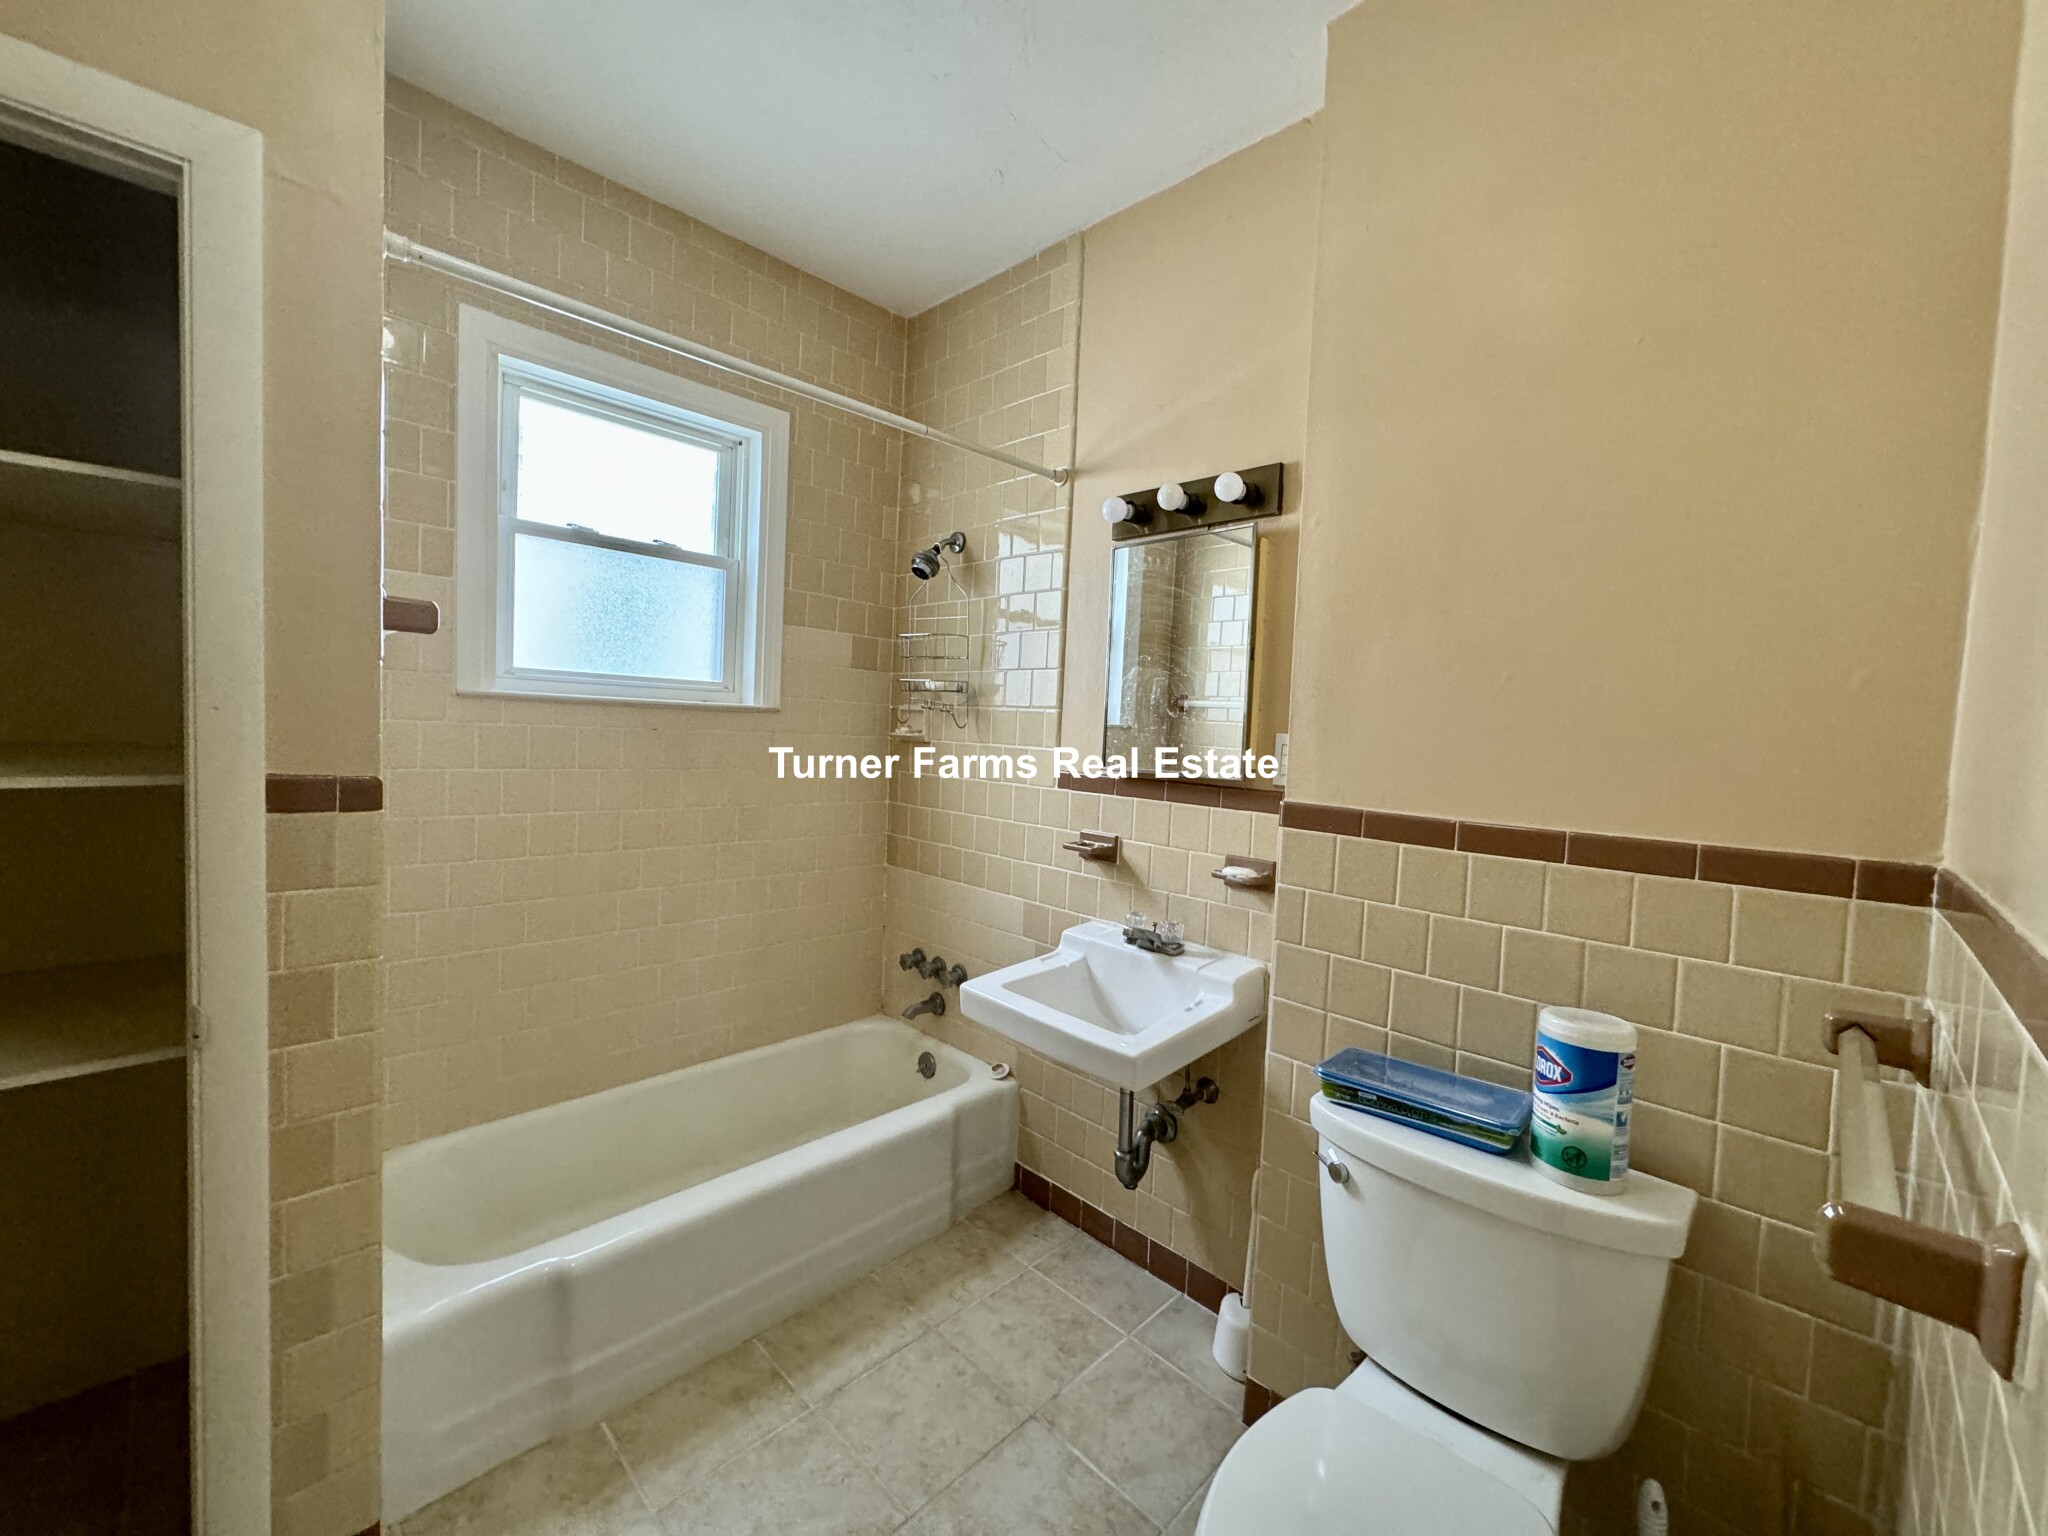 Photos of apartment on Electric Ave.,Somerville MA 02144